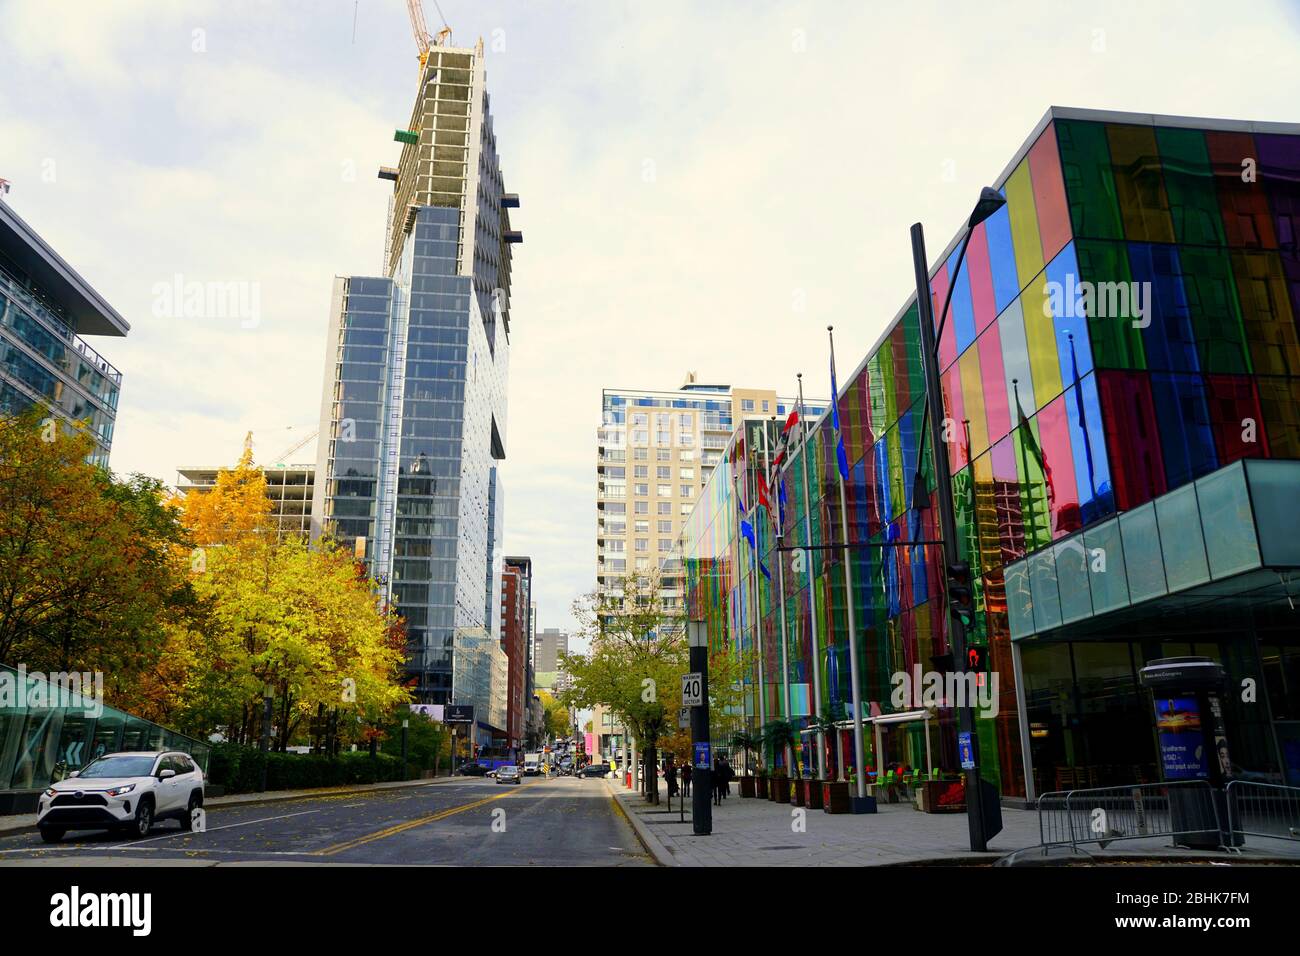 Montreal, Canada - October 27, 2019 - The view of the street near the colorful Palais des Congrès building Stock Photo